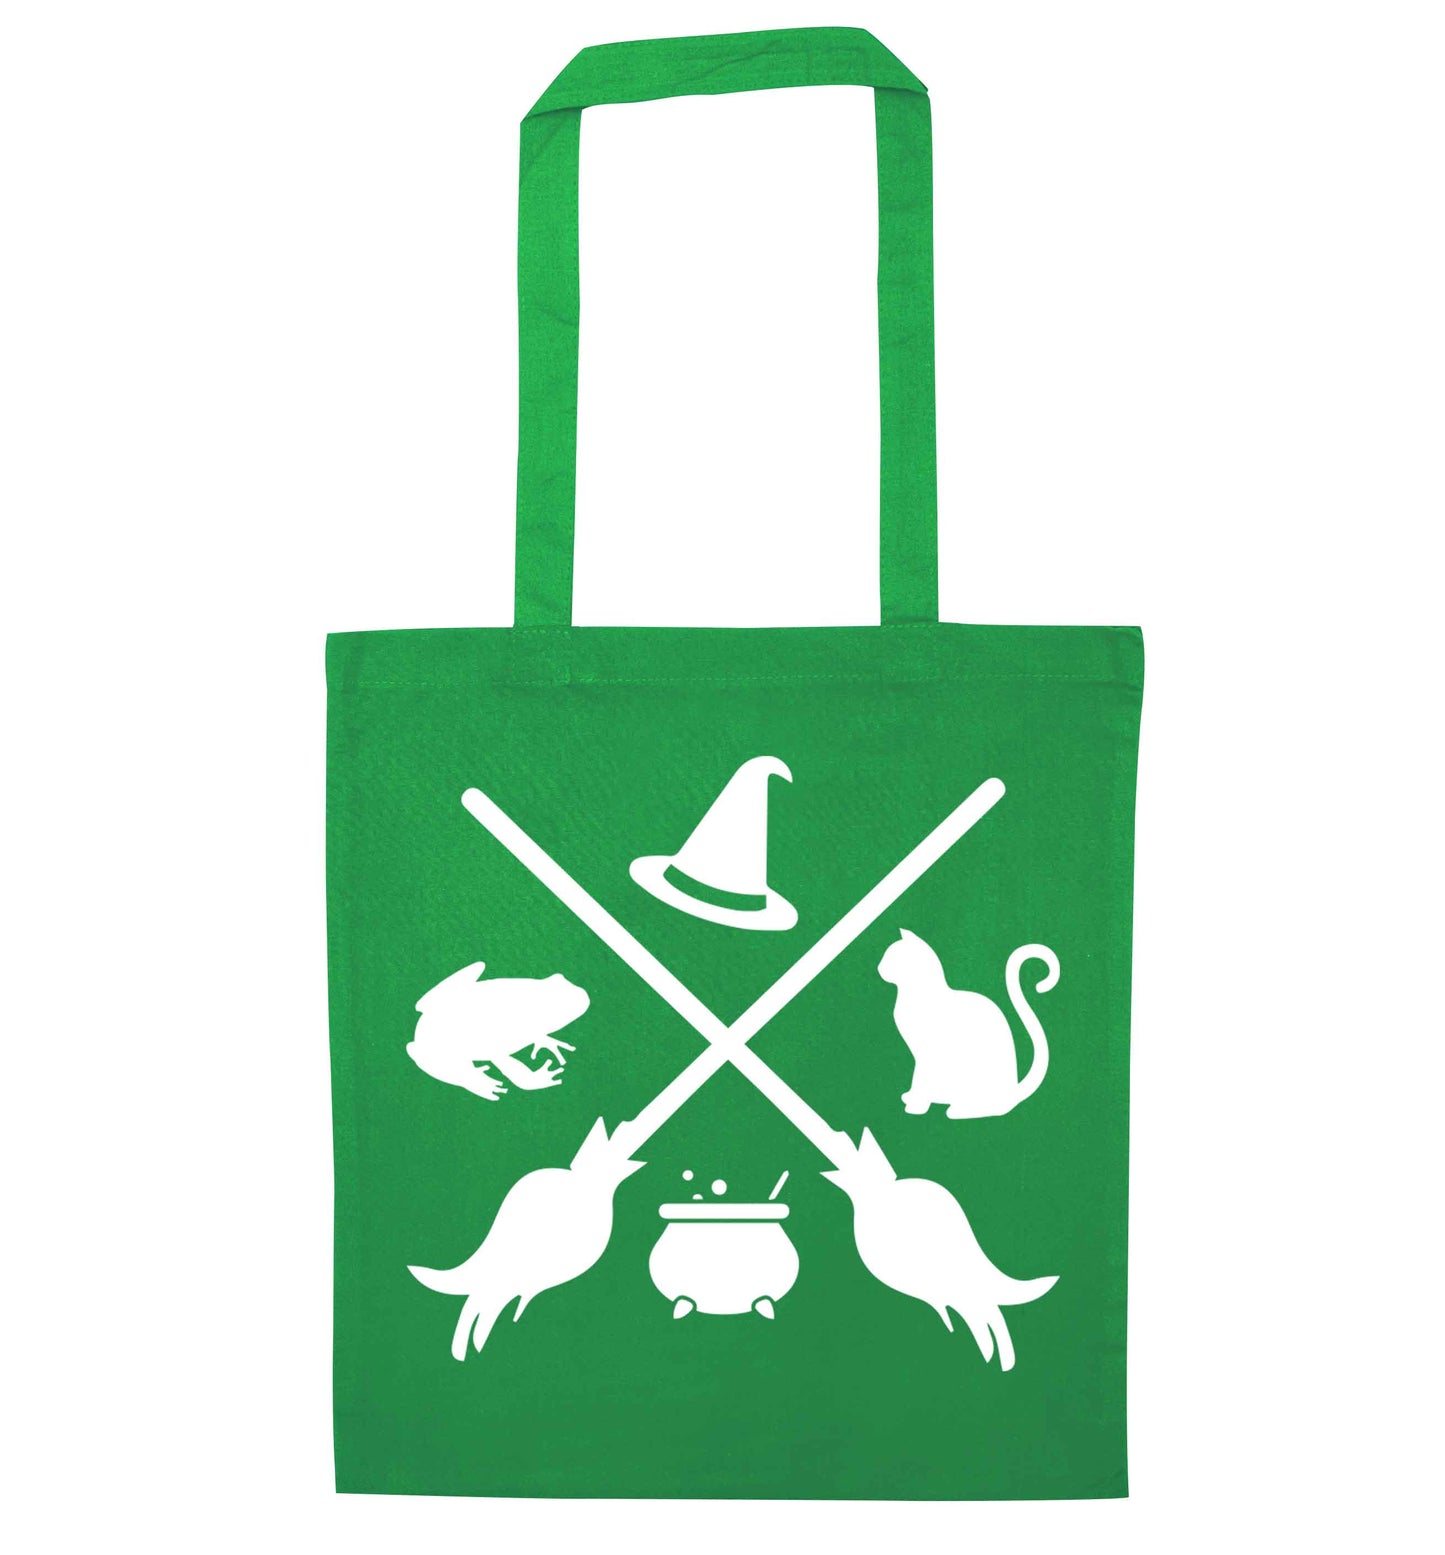 Witch symbol green tote bag